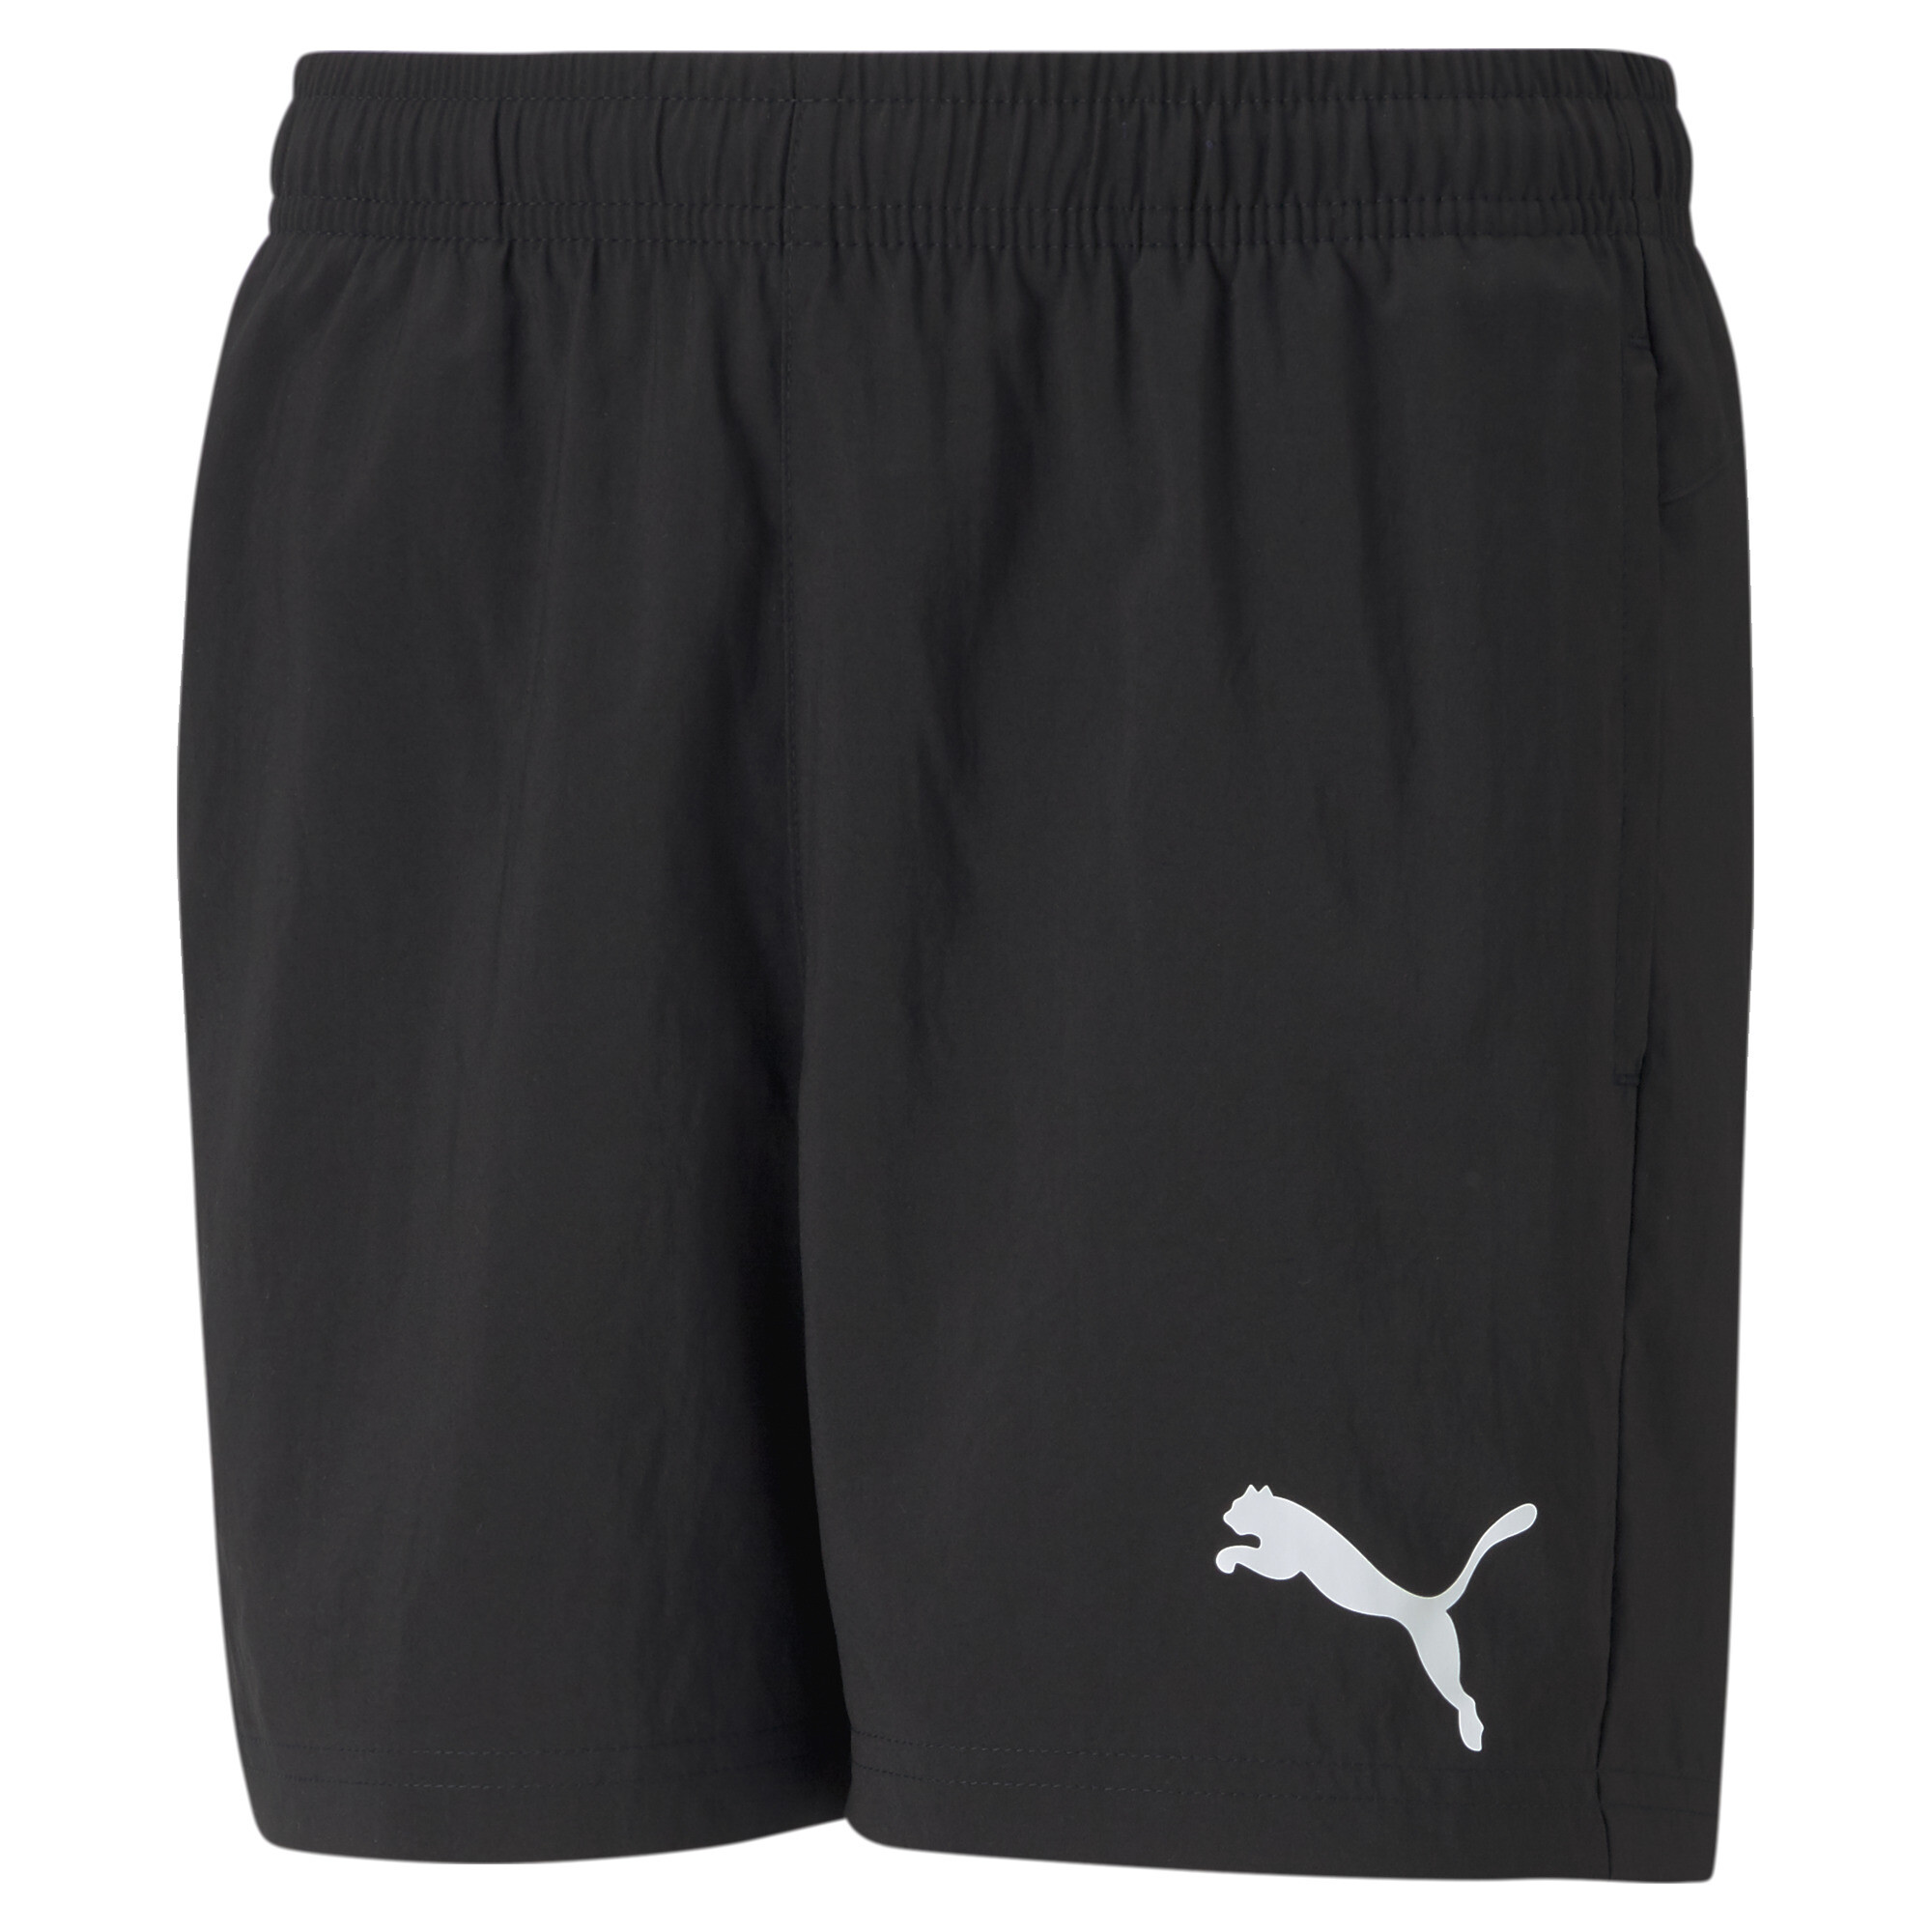 Men's Puma Active Woven Youth Shorts, Black, Size 2-3Y, Clothing